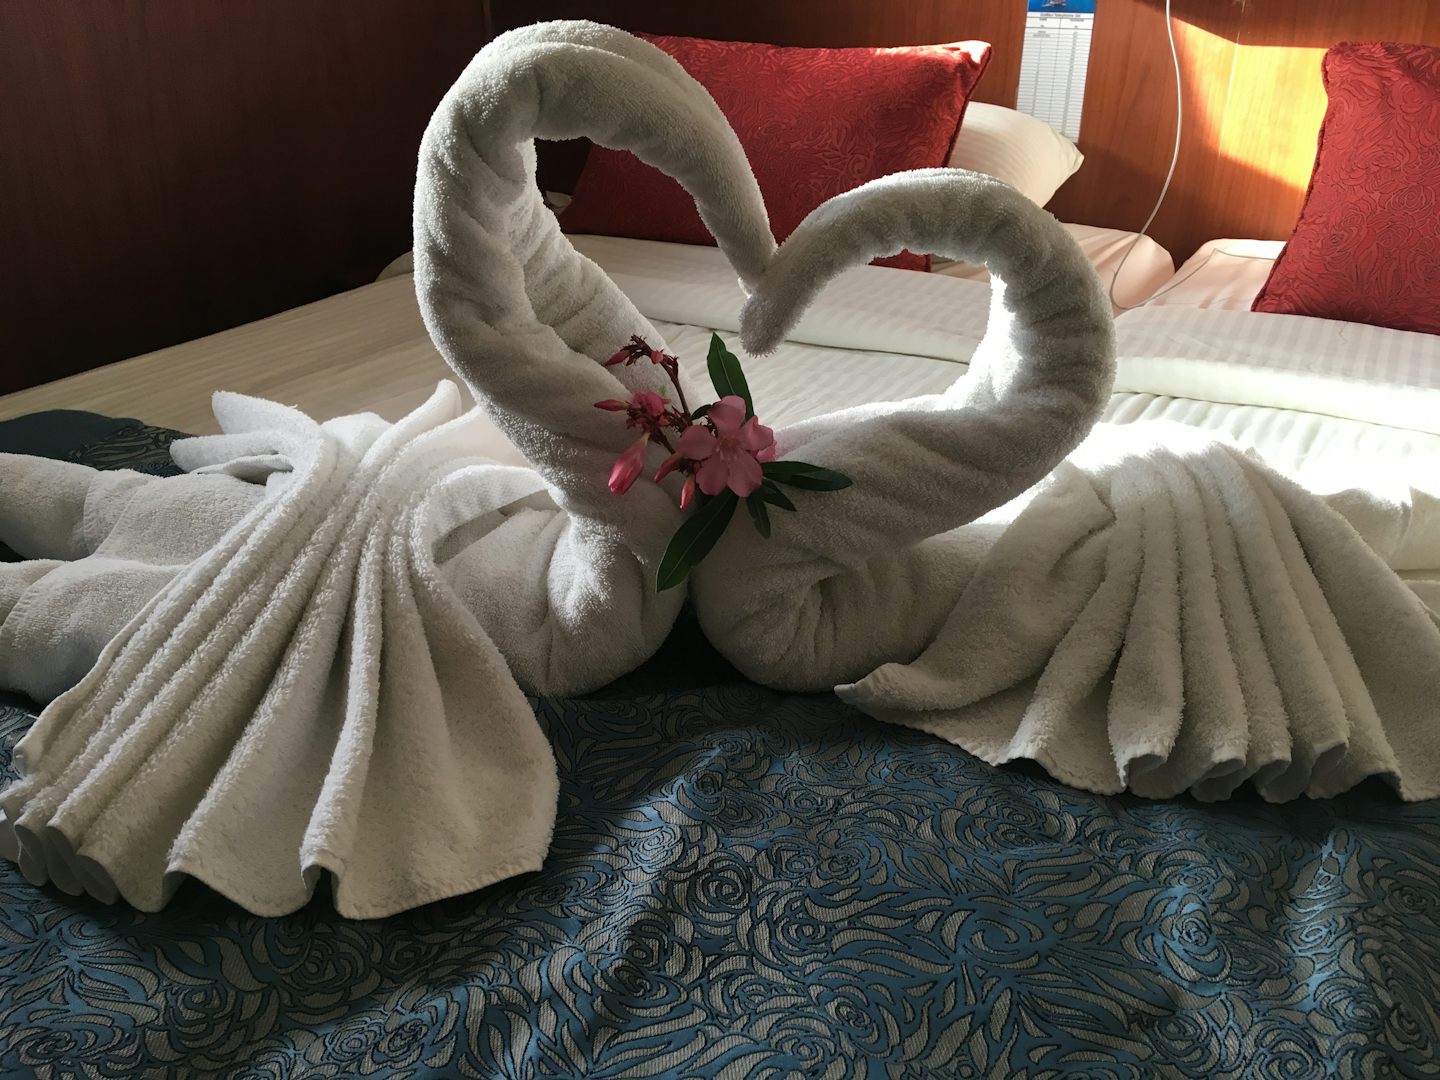 The staff made this beautiful swans for us